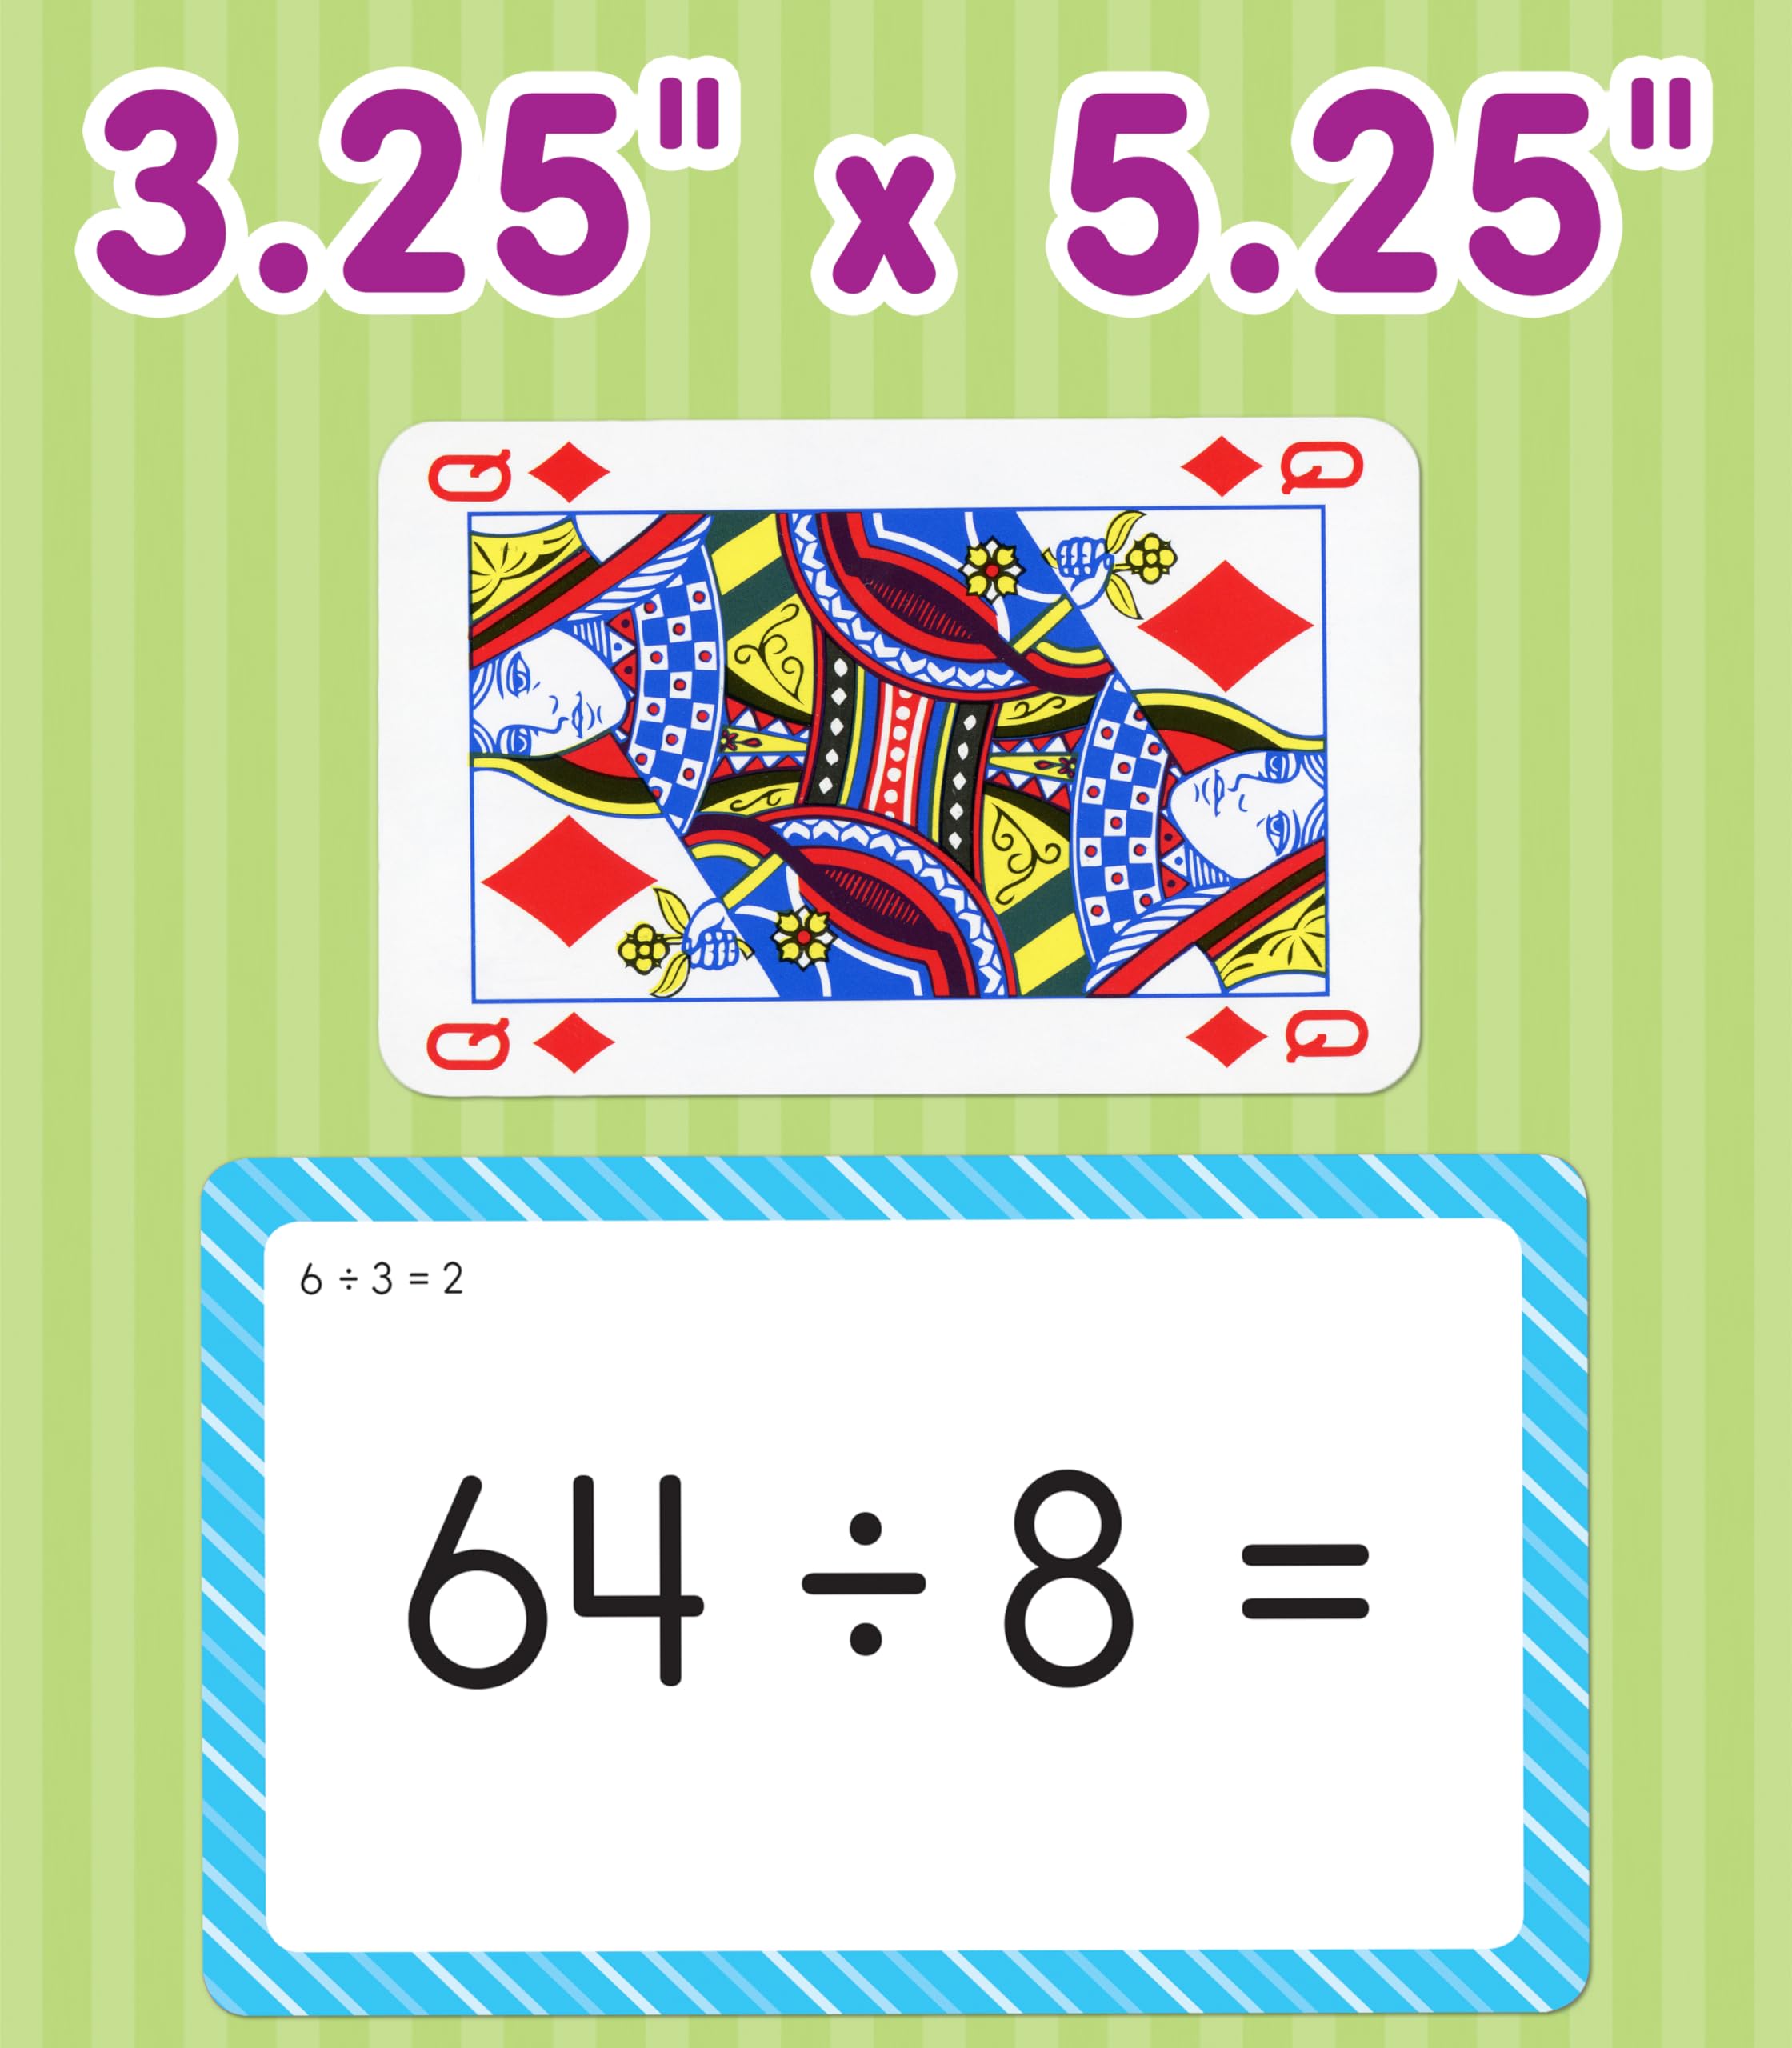 Carson Dellosa 158 Math Flash Cards for Kids Ages 8+, 3-Pack of Whole Number to Ninths Fractions Flash Cards, Facts 0-12 Multiplication and Division Flash Cards for 3rd Grade, 4th Grade, and 5th Grade